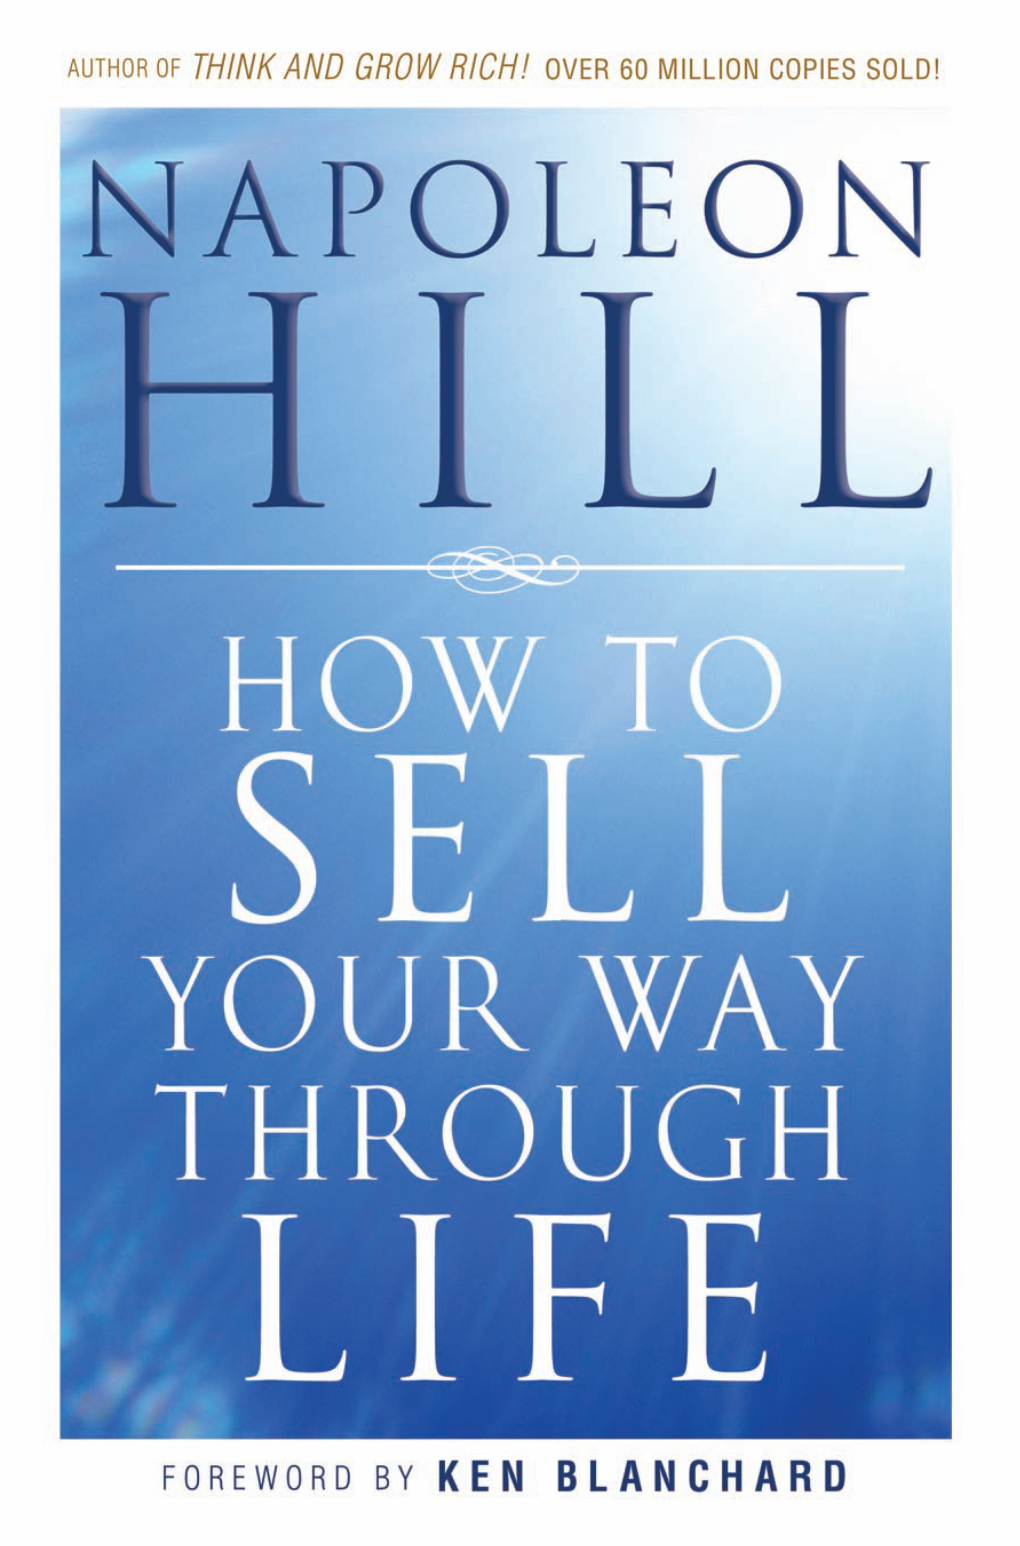 How to Sell Your Way Through Life. It Is a Collection of Simple Truths That Will Forever Change the Way You See Yourself.”